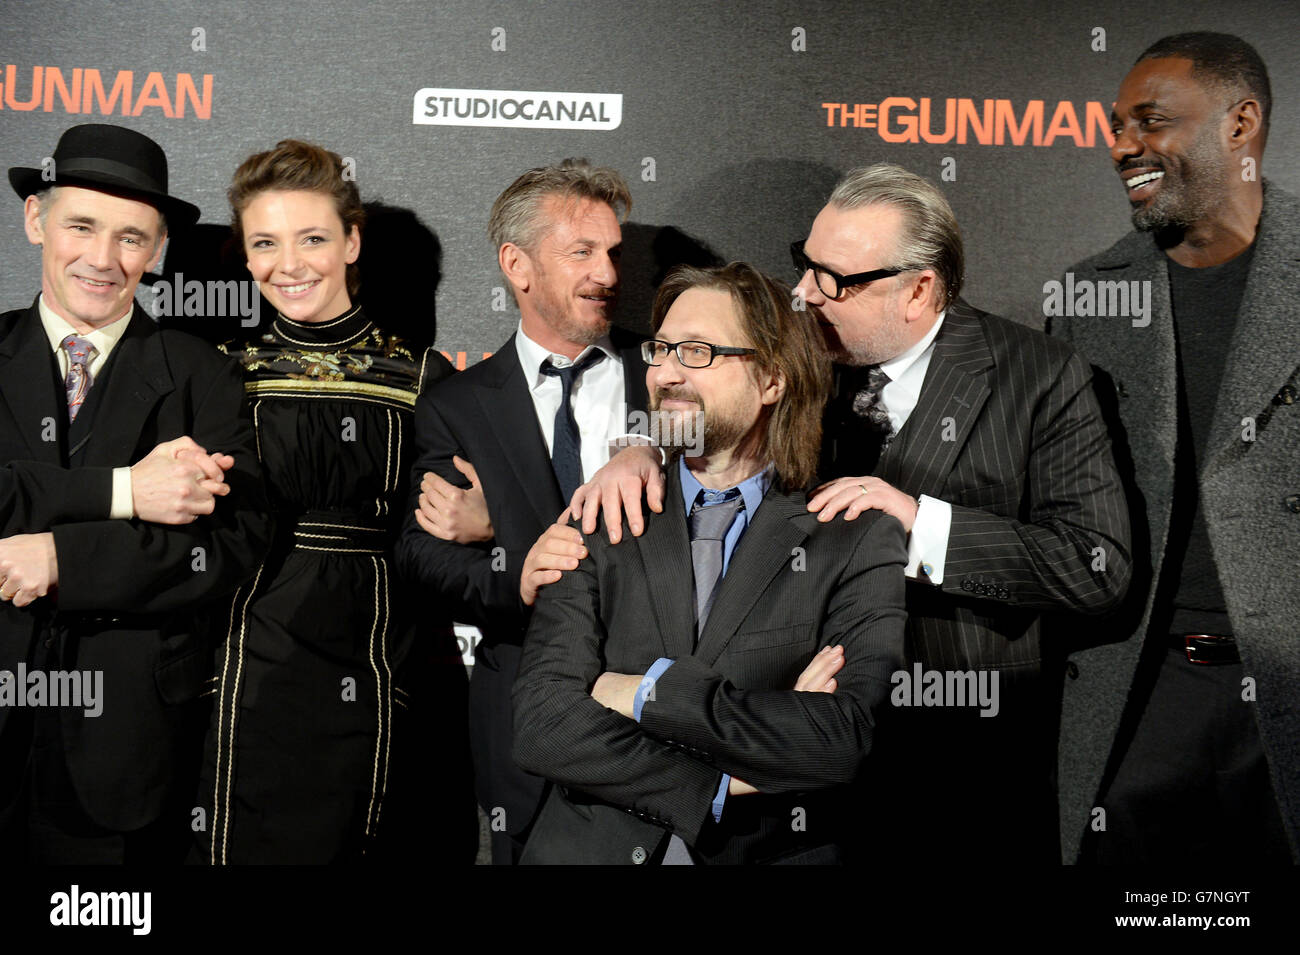 (left to right) Mark Rylance, Jasmine Trinca, Sean Penn, Pierre Morel, Ray Winstone and Idris Elba attend the World Premiere of The Gunman at the BFI South Bank, London. PRESS ASSOCIATION Photo. Picture date: Monday February 16, 2015.Photo credit should read: Anthony Devlin/PA Wire Stock Photo